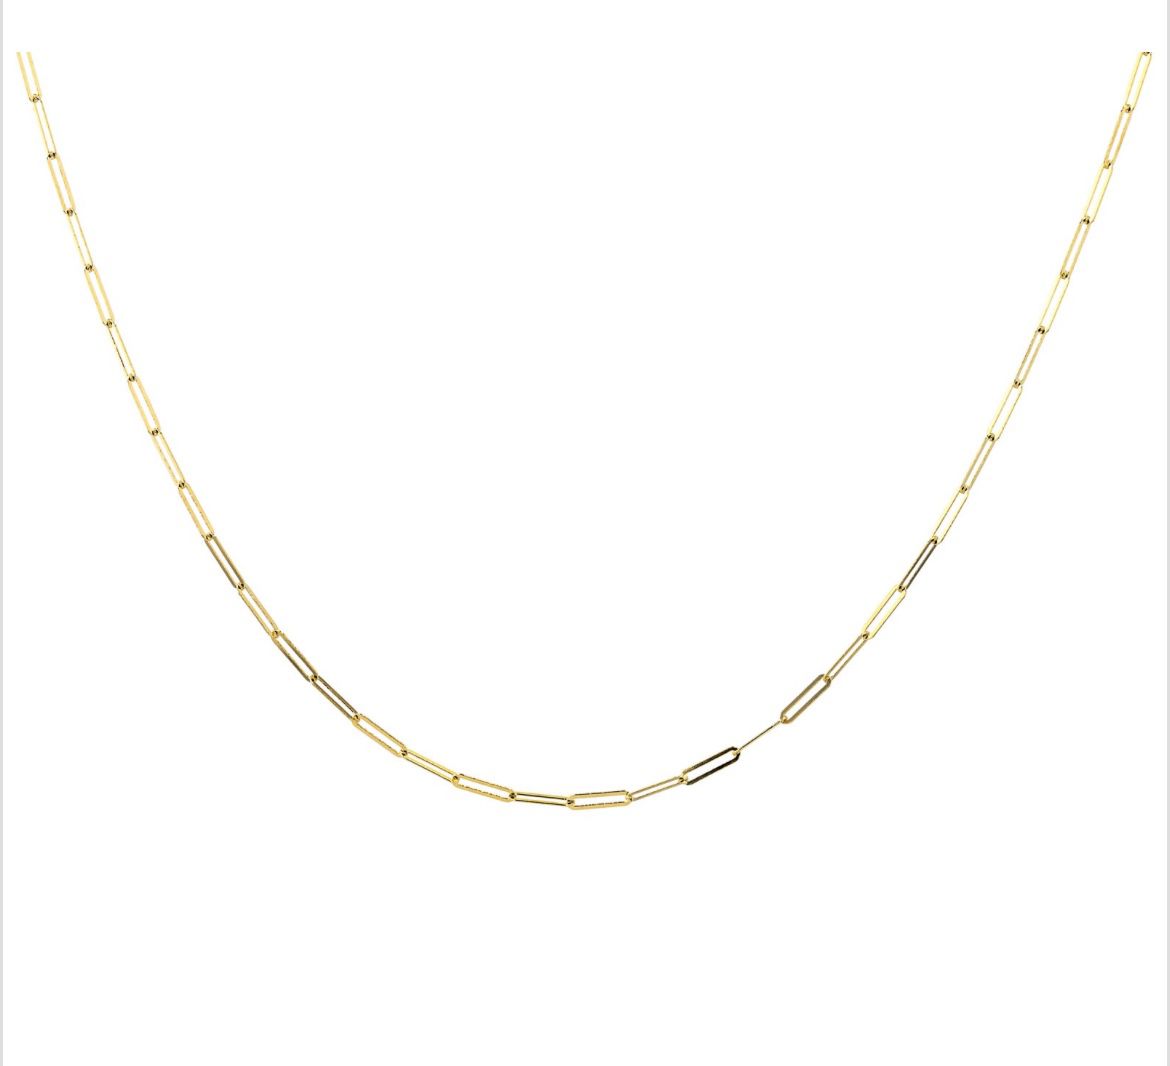  10K Yellow Gold 1.7MM Paperclip 20 Inch Chain